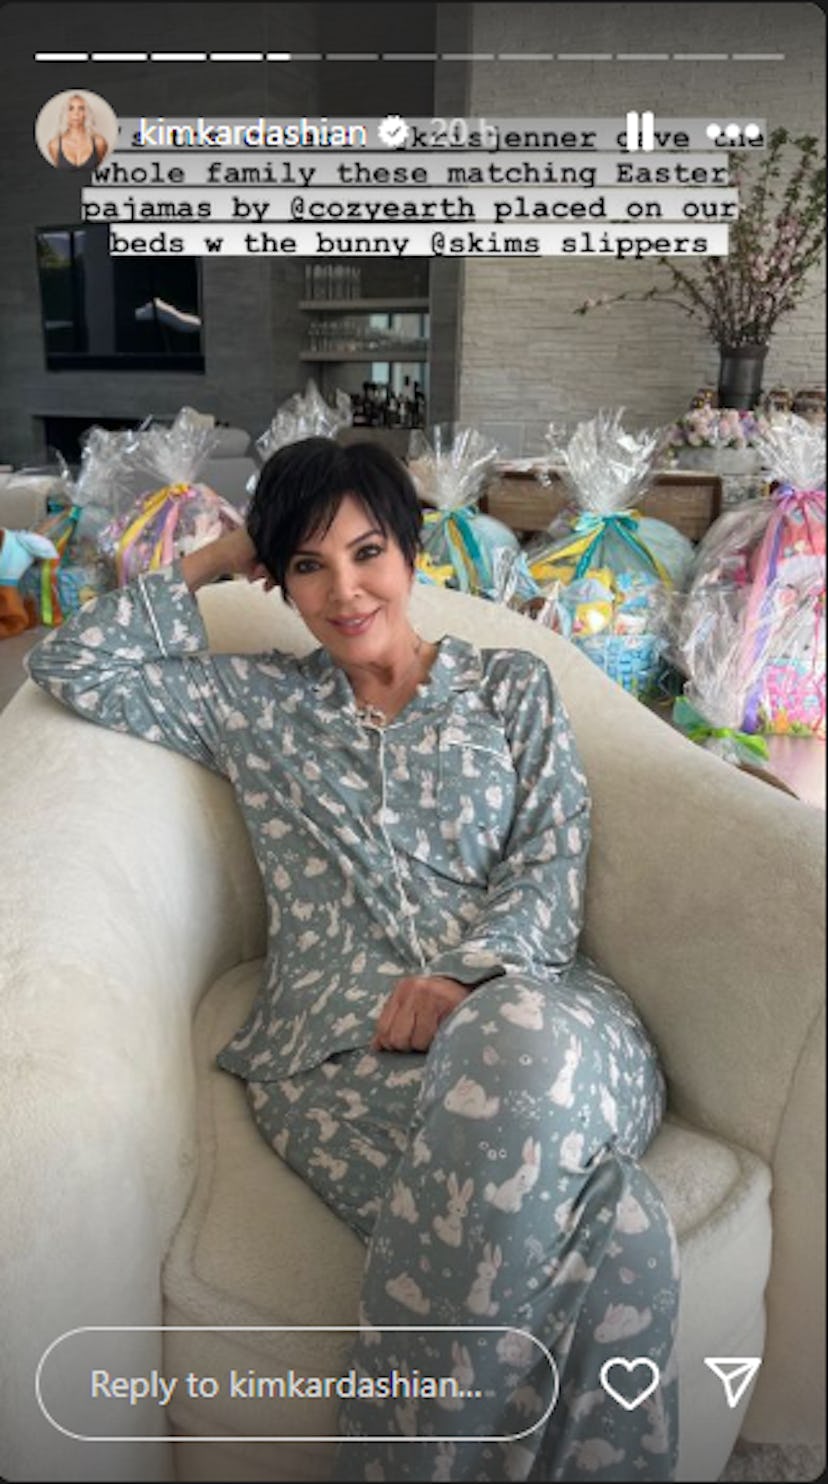 Kris Jenner bought matching pajamas for her family for Easter.